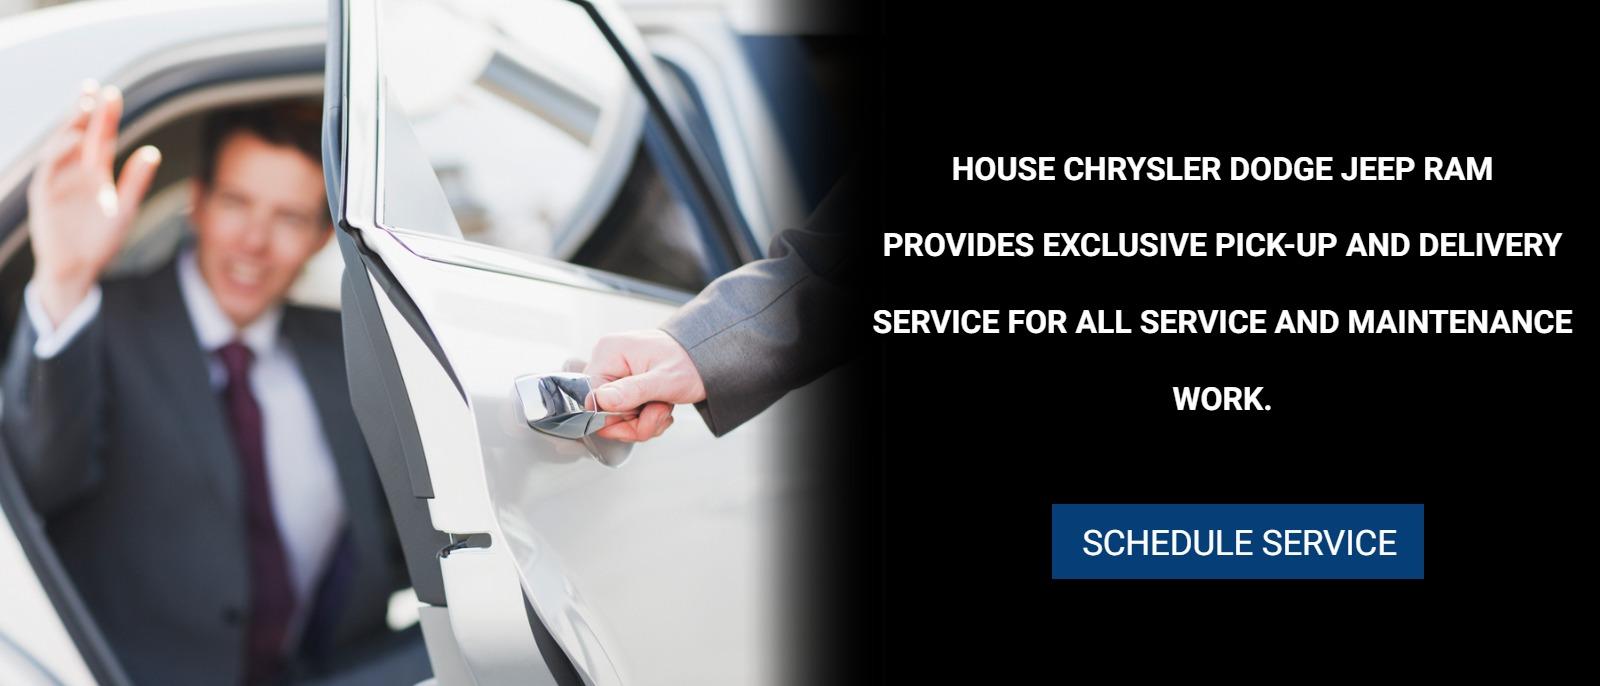 HOUSE CHRYSLER
DODGE JEEP RAM
PROVIDES EXCLUSIVE
PICK-UP AND DELIVERY SERVICE FOR ALL SERVICE AND MAINTENANCE WORK.